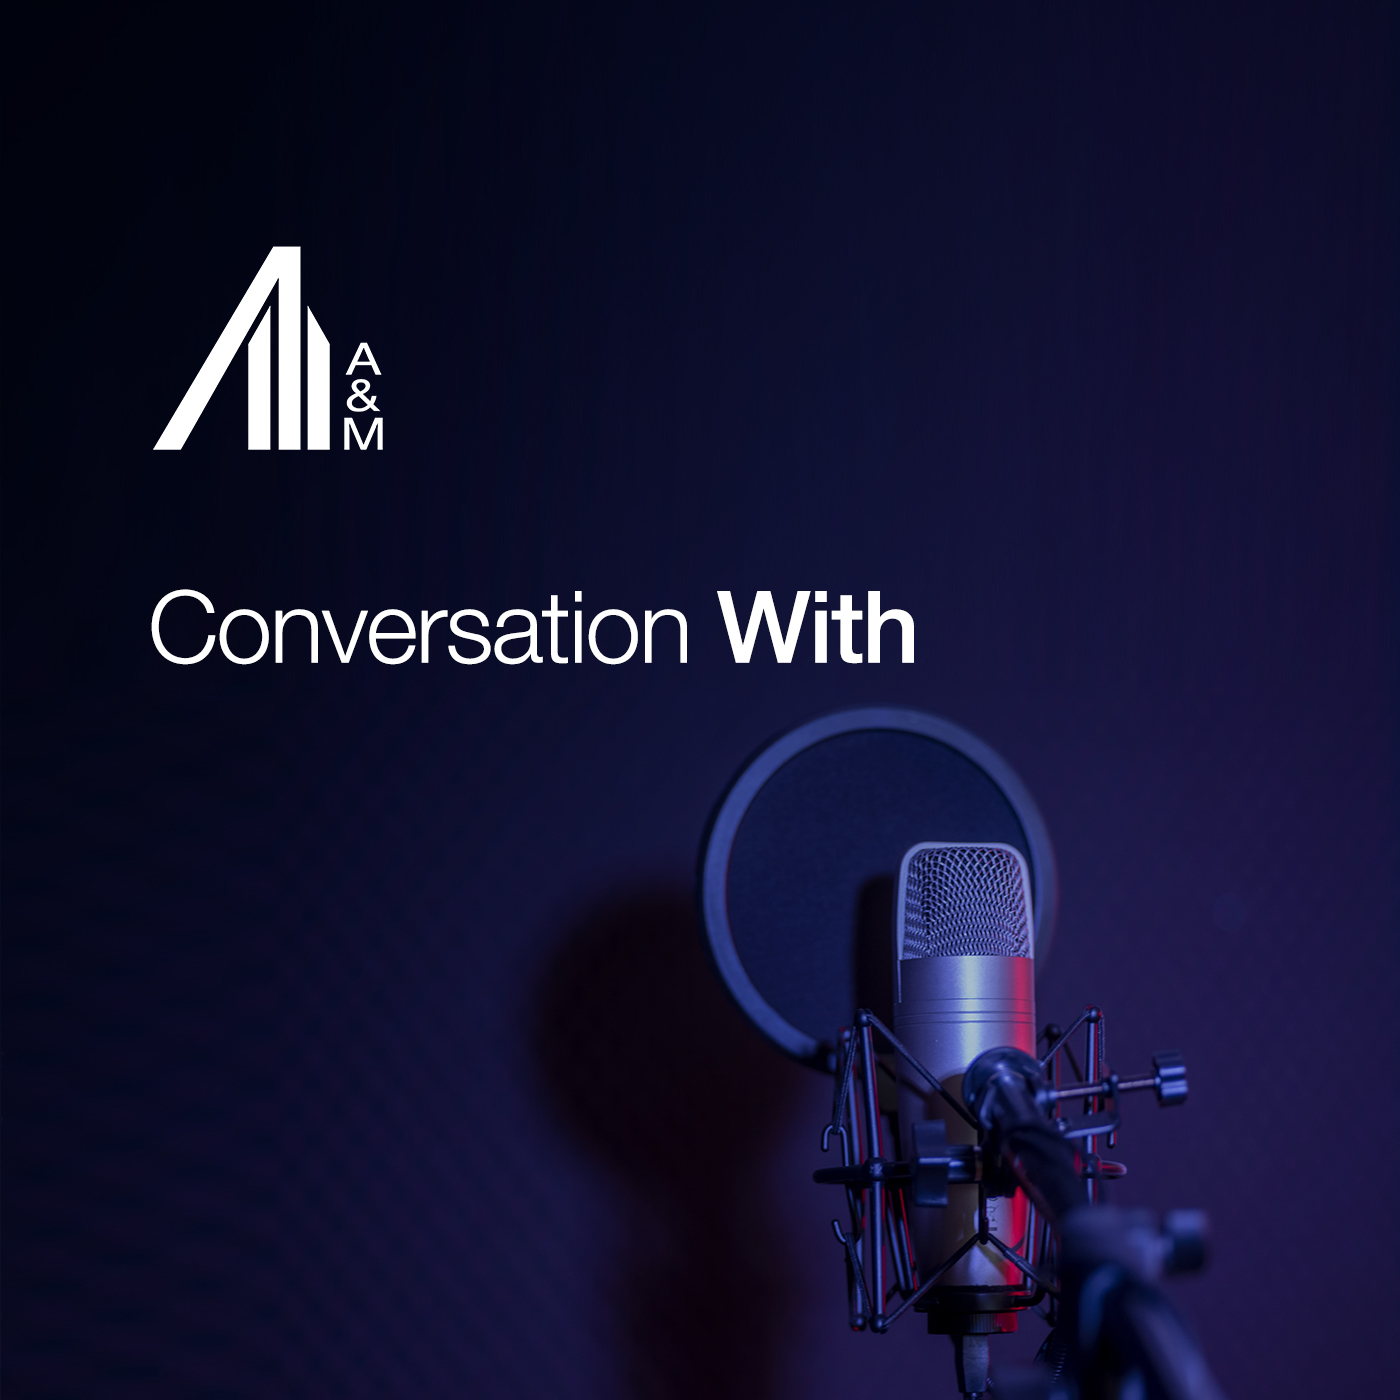 A&M Conversation With: FASB, How to Start Planning for Implementation